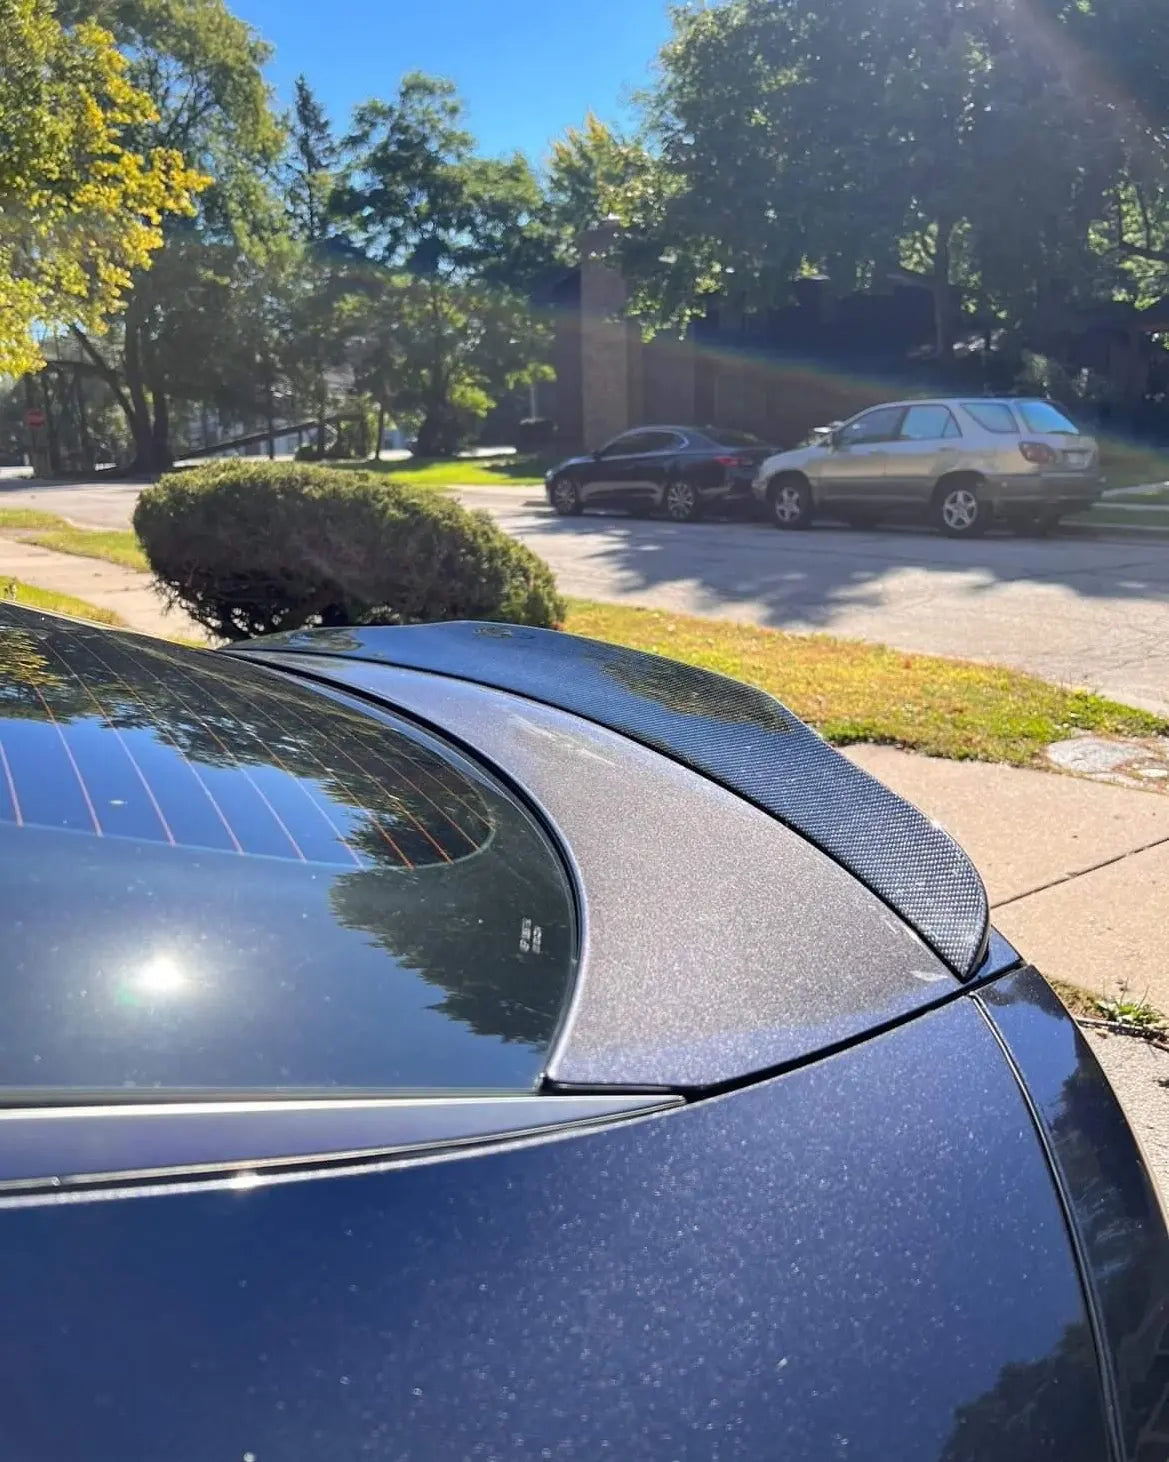 angled side view of the KIA STINGER's Duckbill Spoiler, capturing the distinctive curvature and design that complements the car’s styling